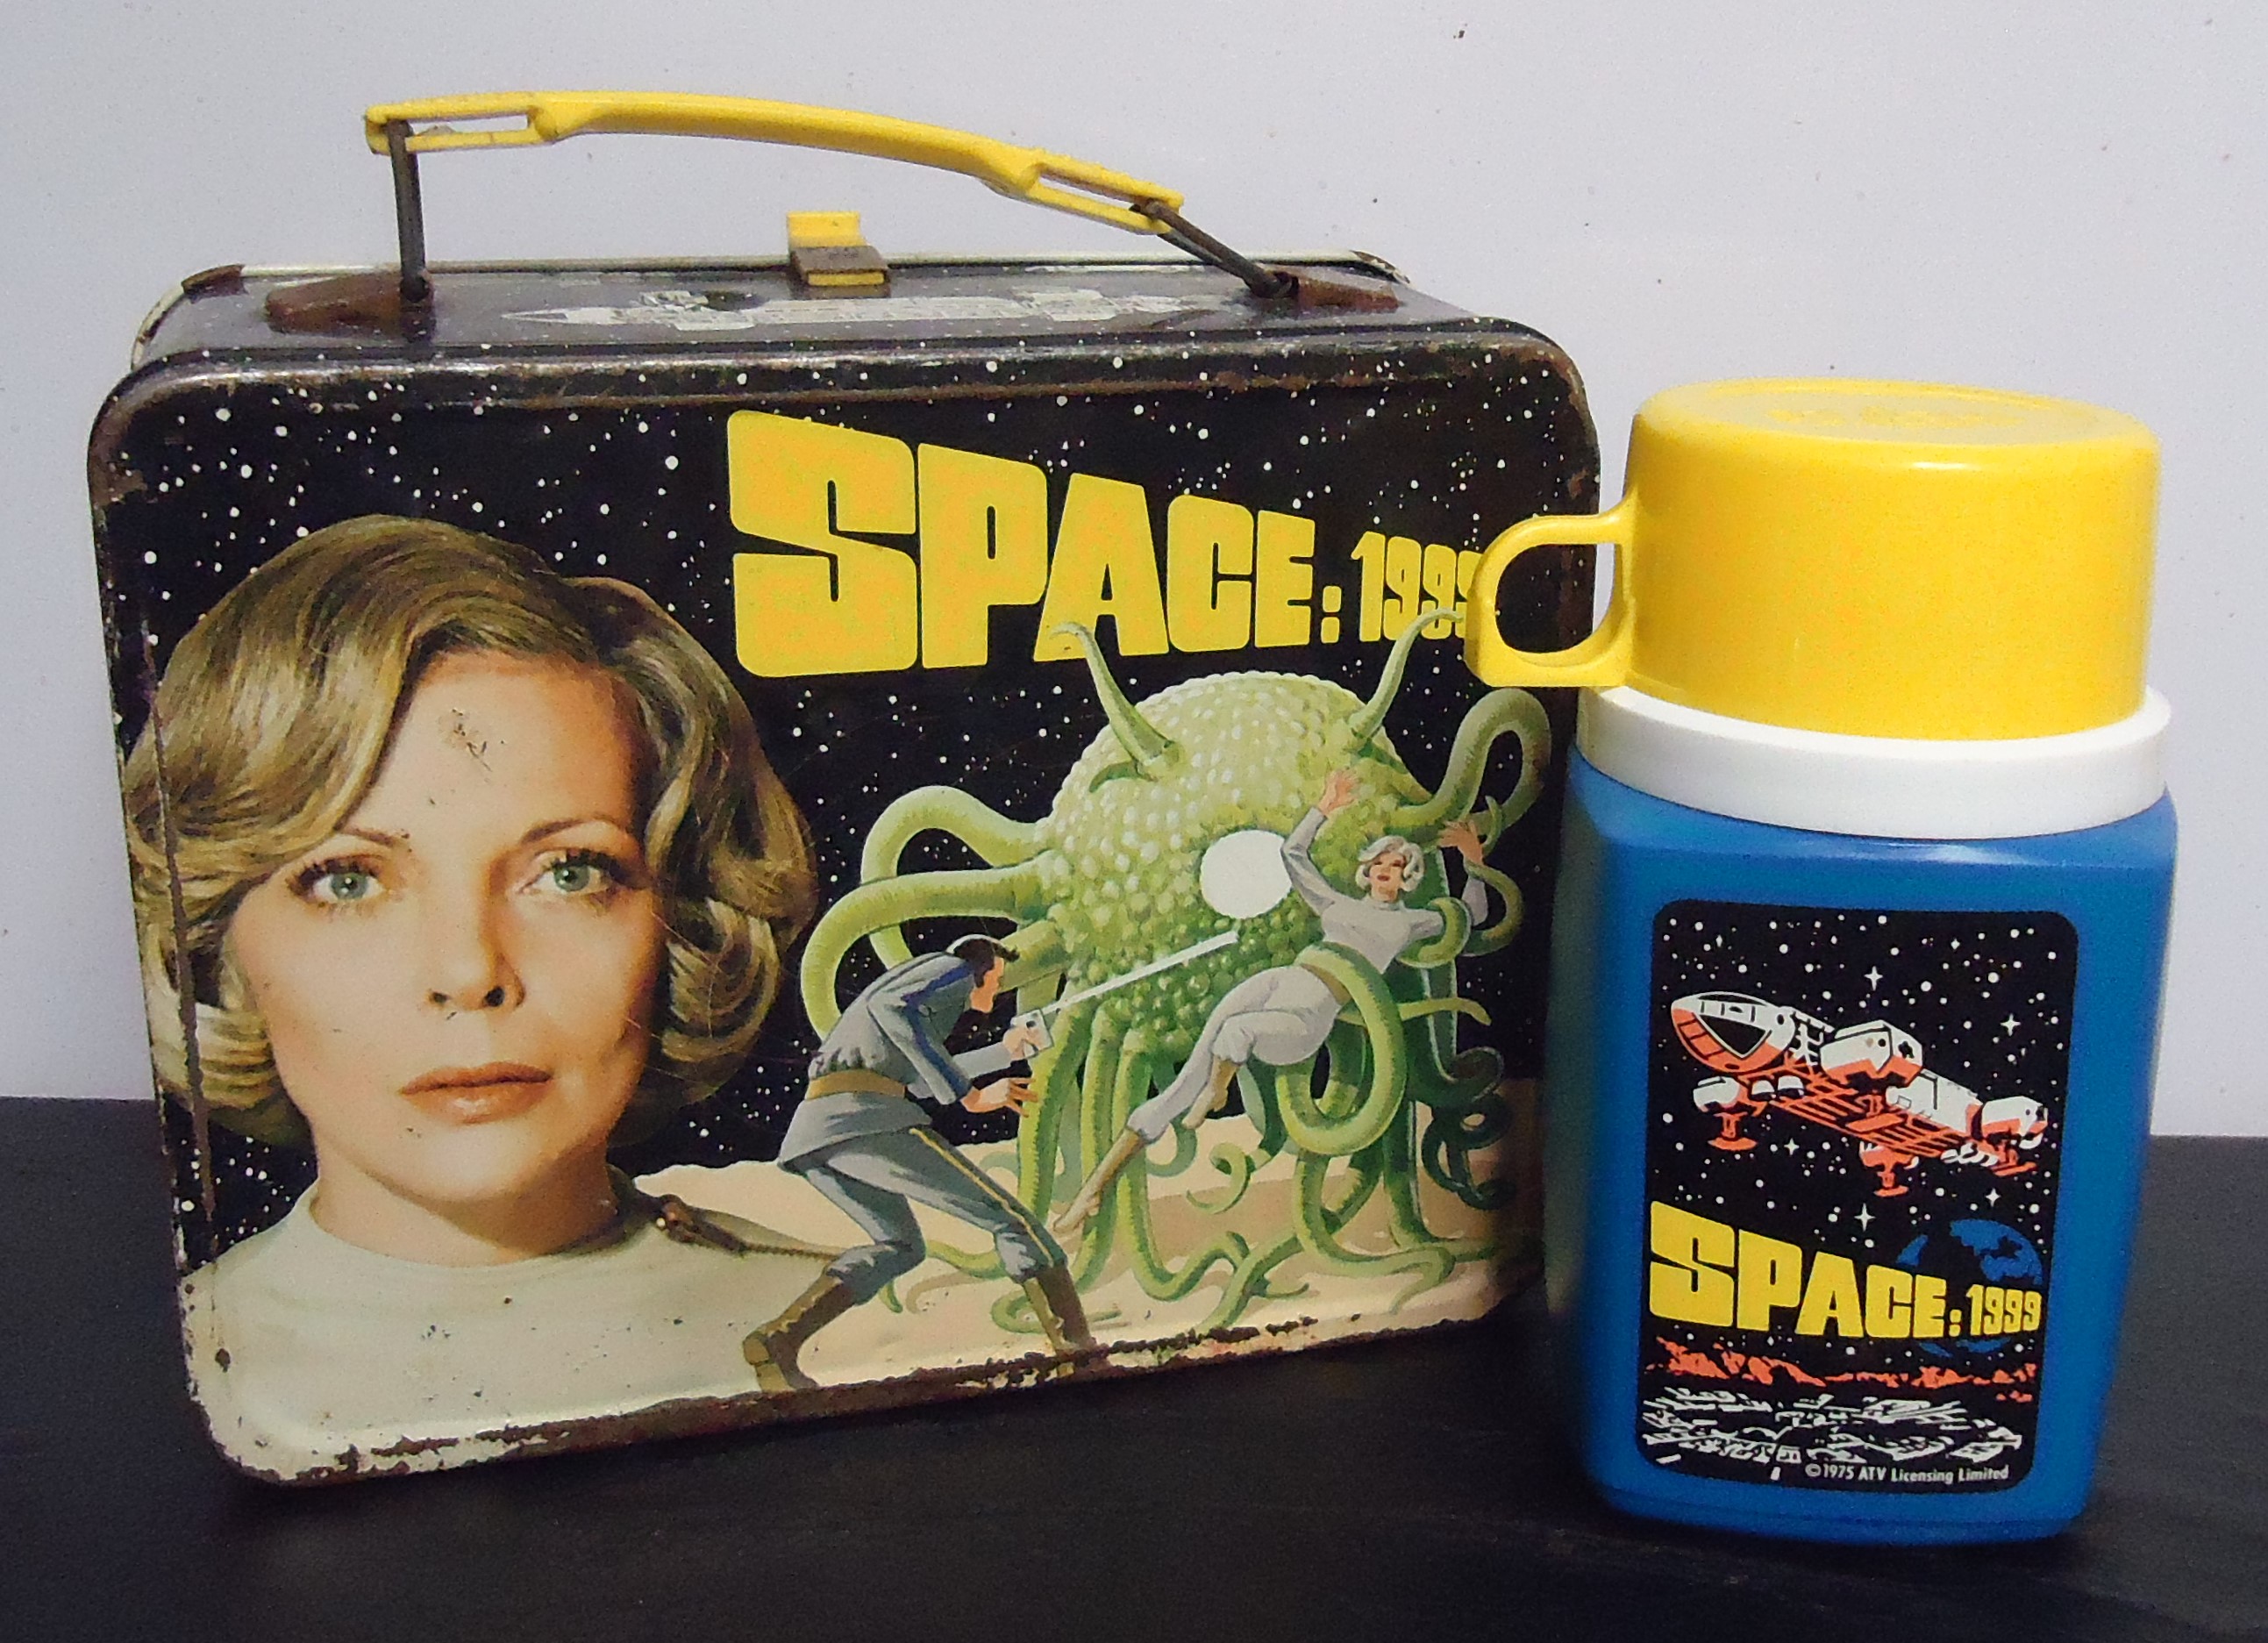 (2G) "Space: 1999" Metal Lunch Box 
W/ Thermos
$58.00